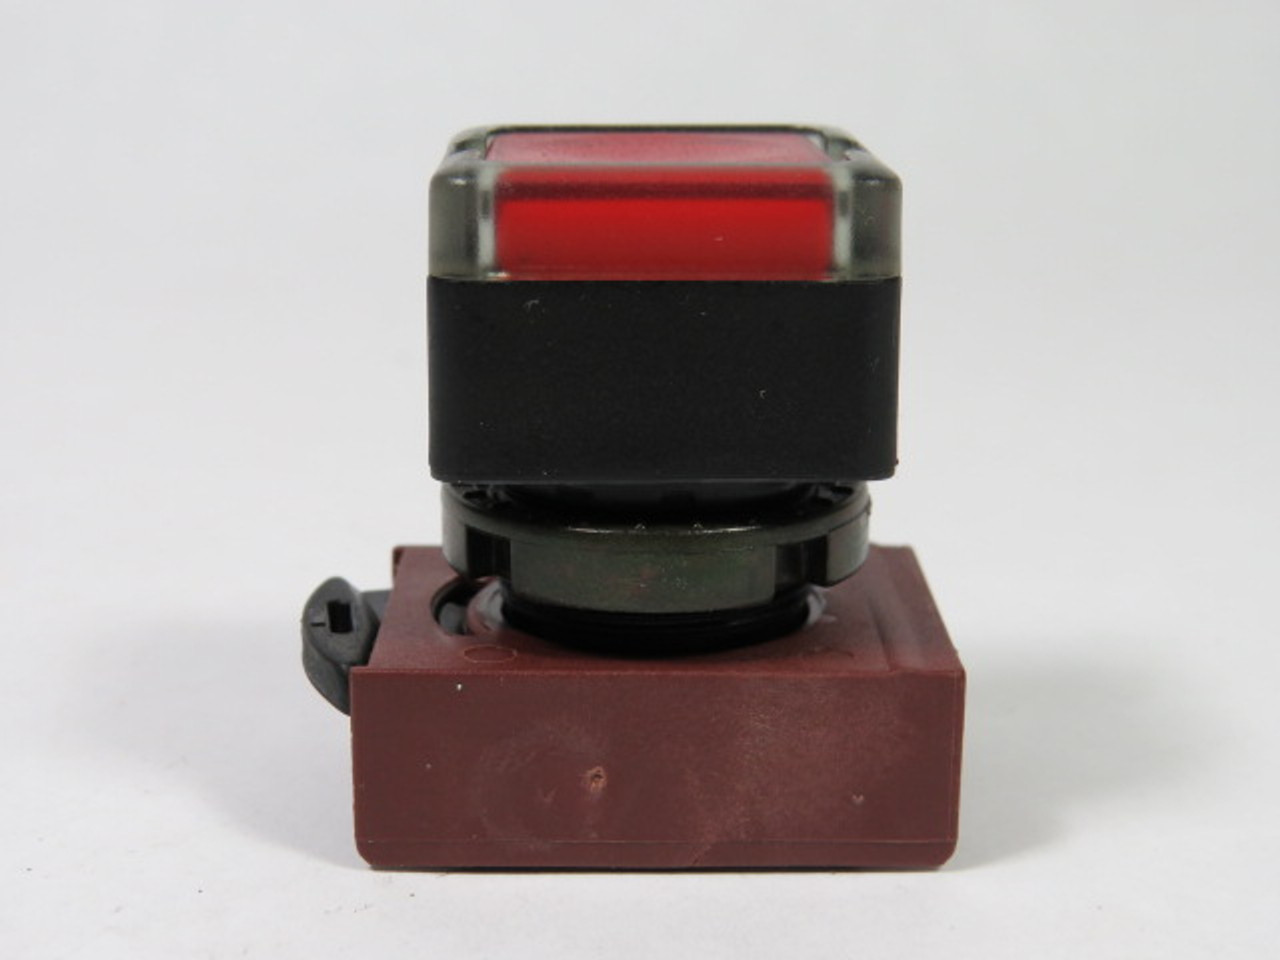 General Electric P9SPLRGD Push Button Illuminated Red Flush USED